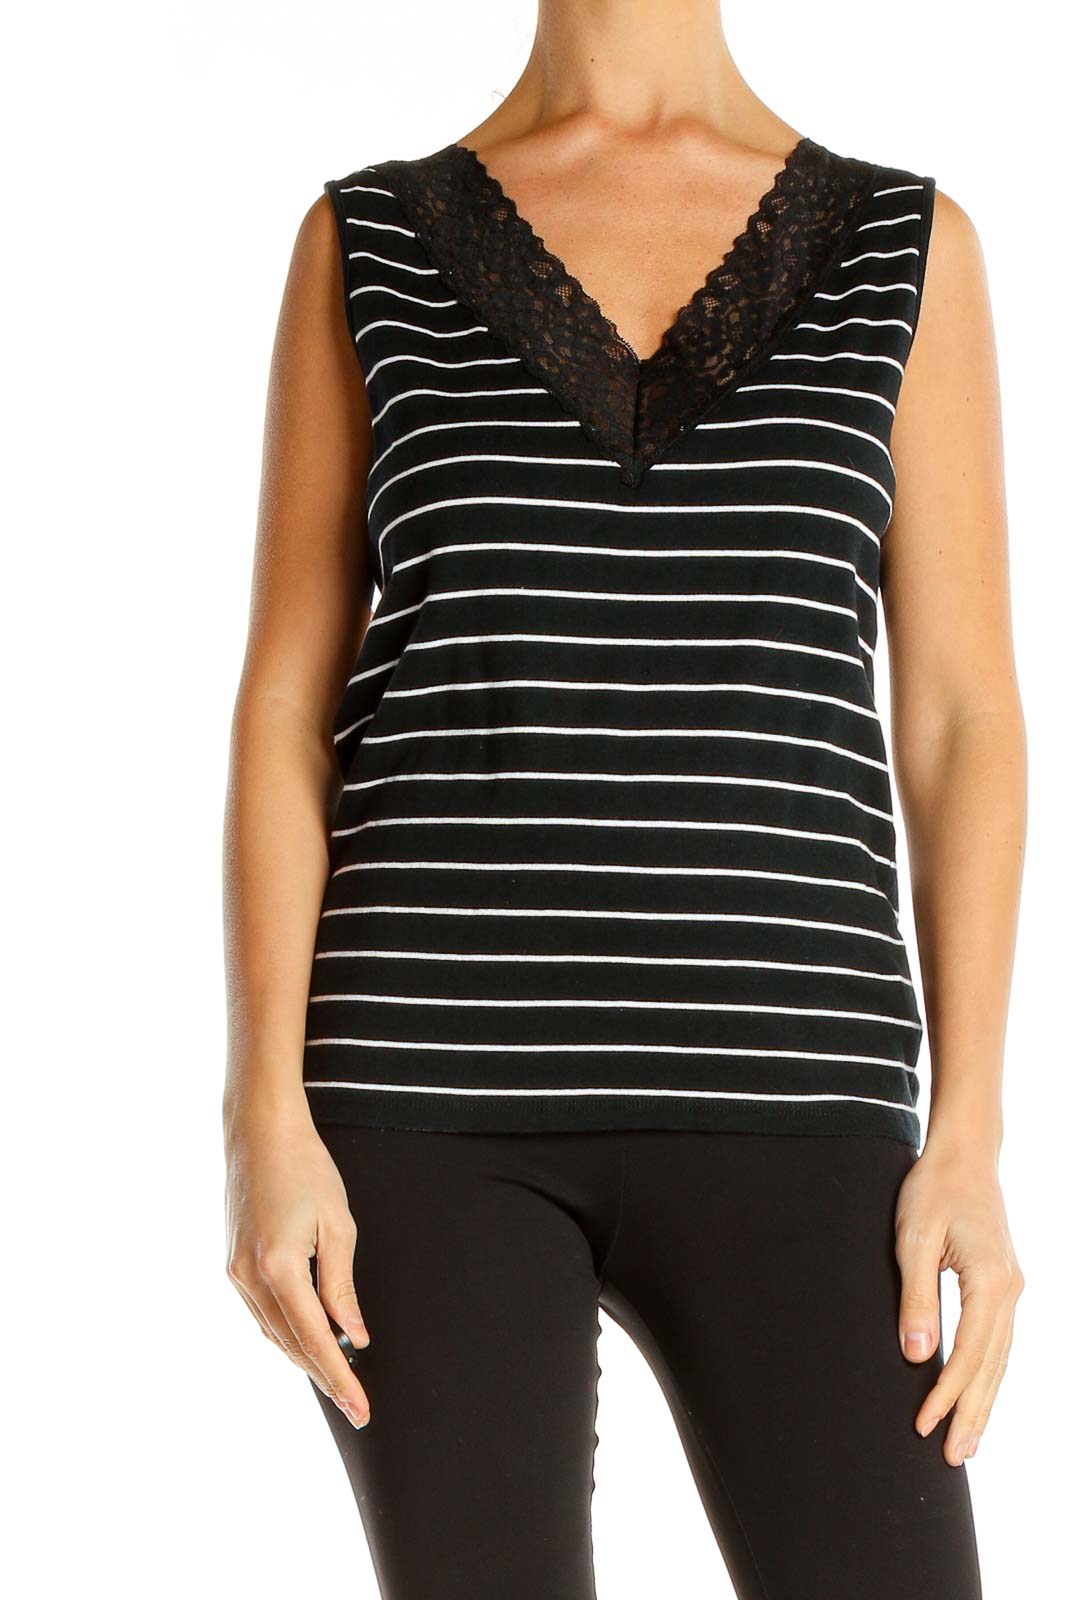 Black White Striped Casual Tank Top with Lace Trim Front